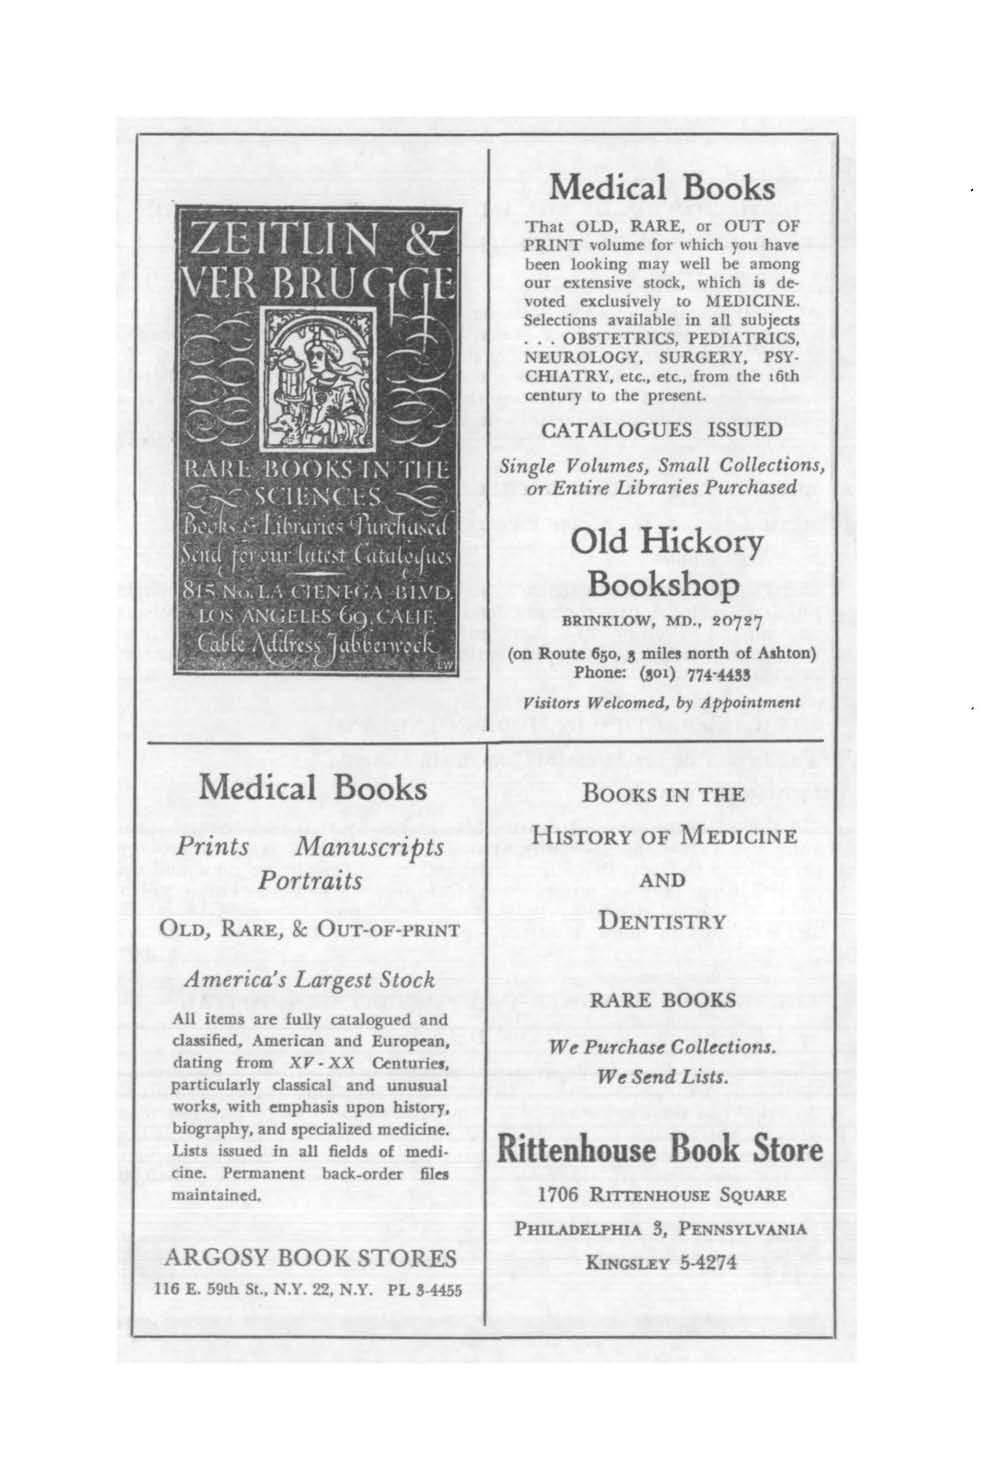 Medical Books Prints Manuscripts Portraits OLD, RARE, 8C OUT-OF-PRINT America's Largest Stock All items are fully catalogued and classified, American and European, dating from XV - XX Centuries,